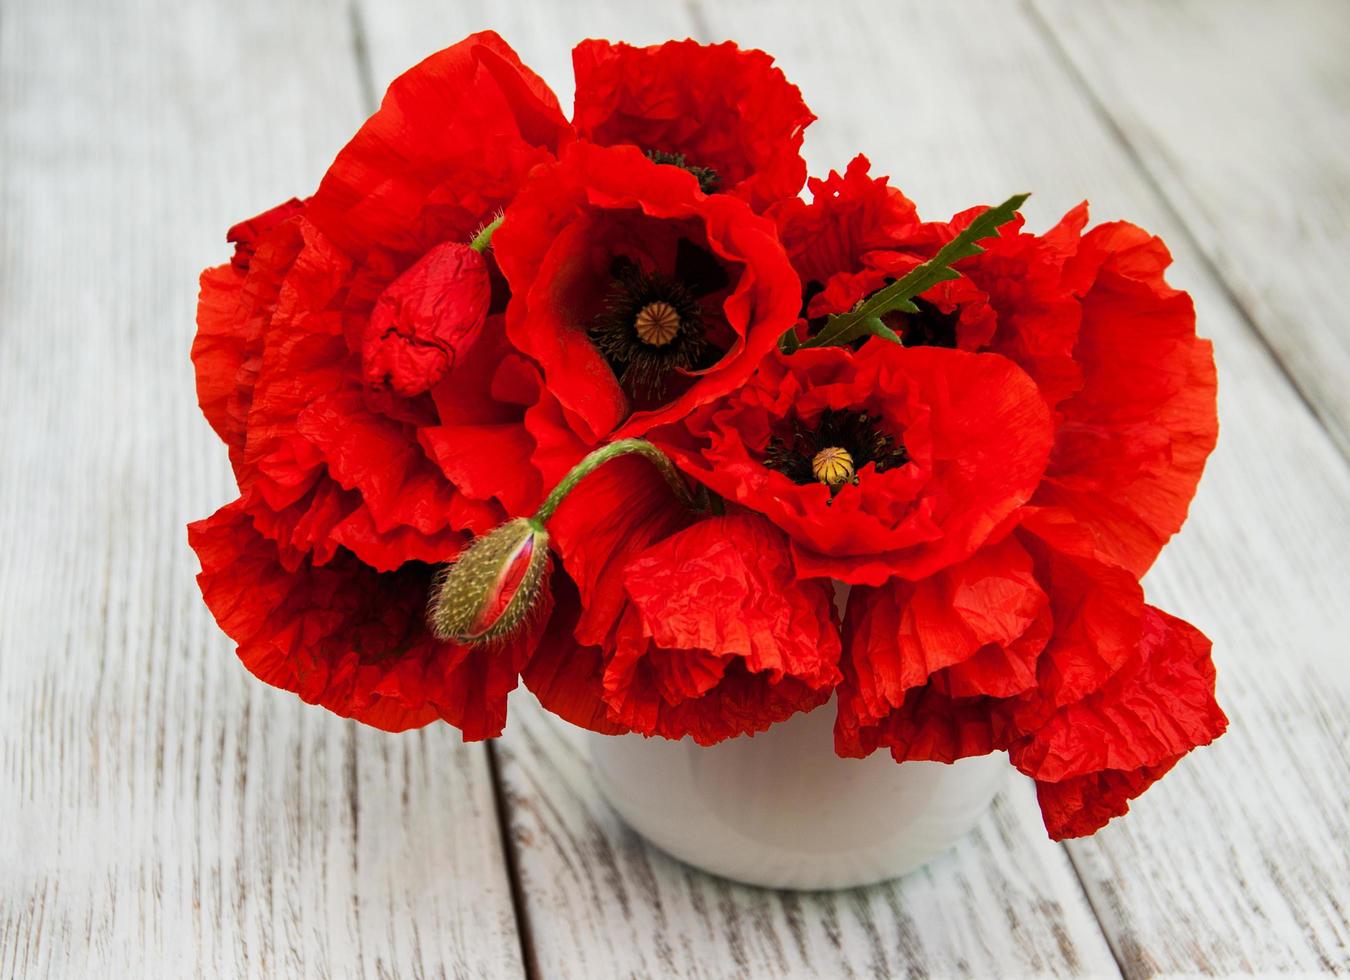 Red poppies in a vase photo